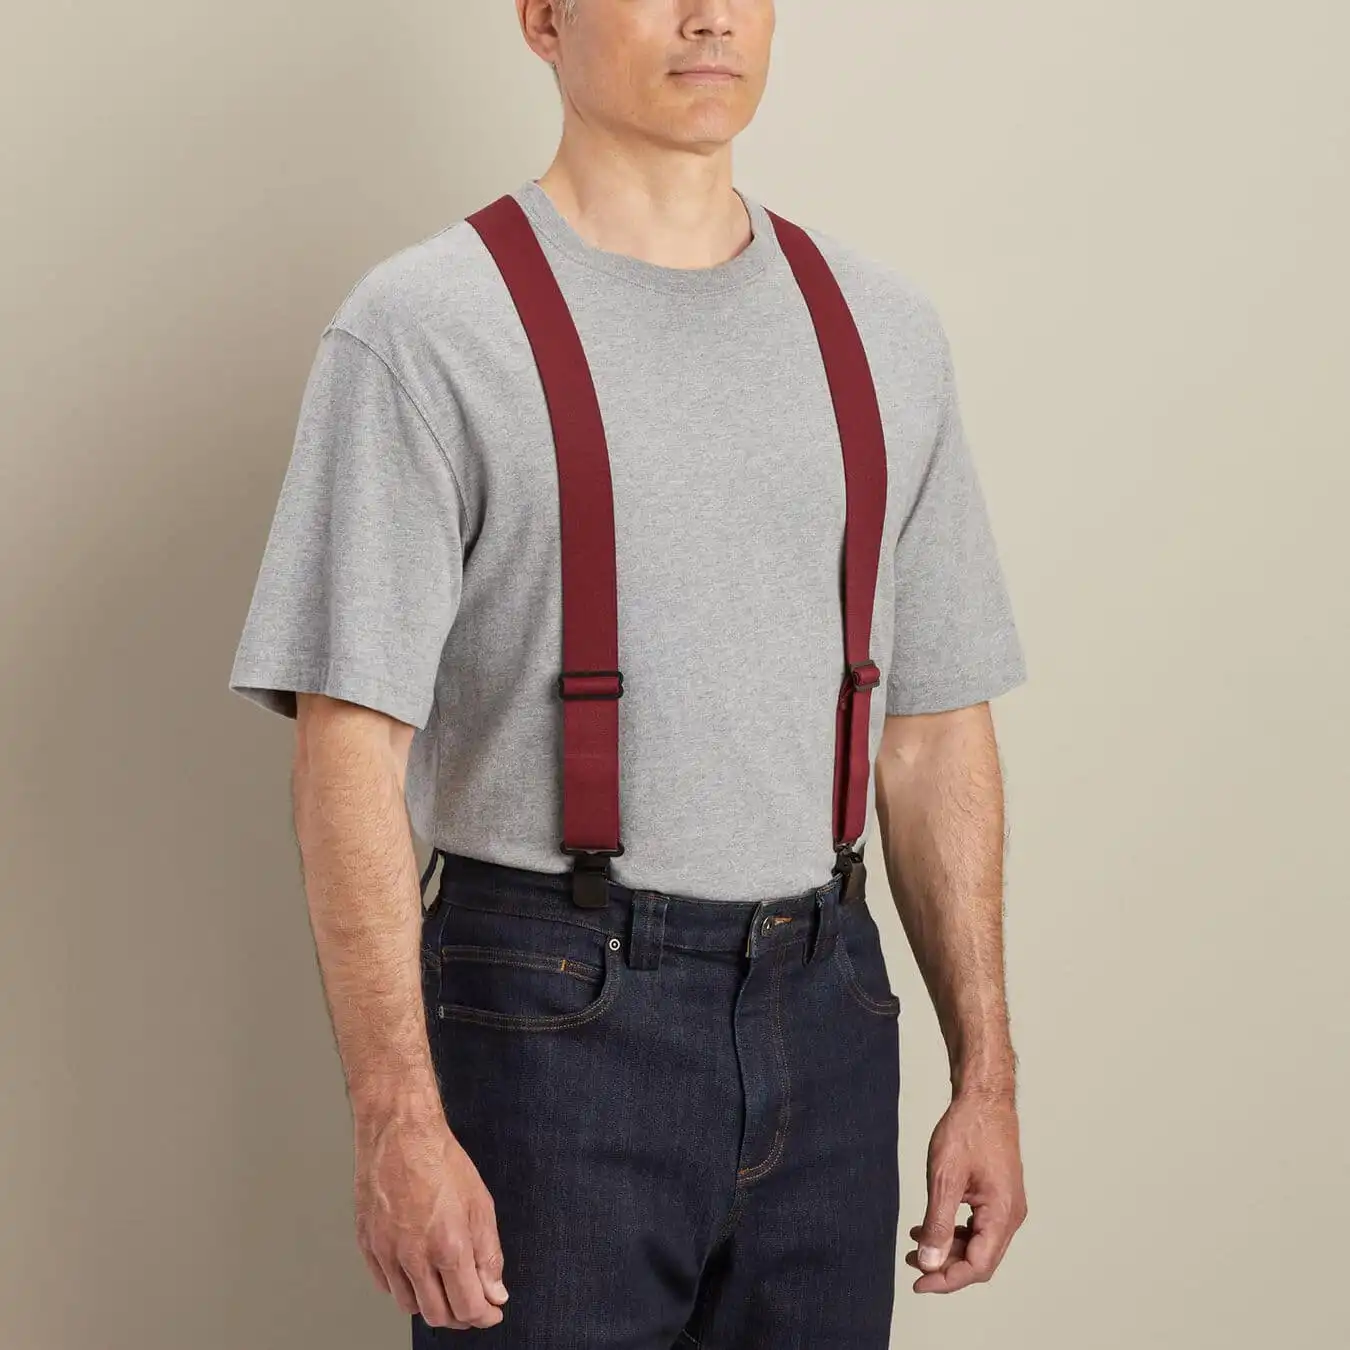 Duluth Trading Thin Clip Suspenders